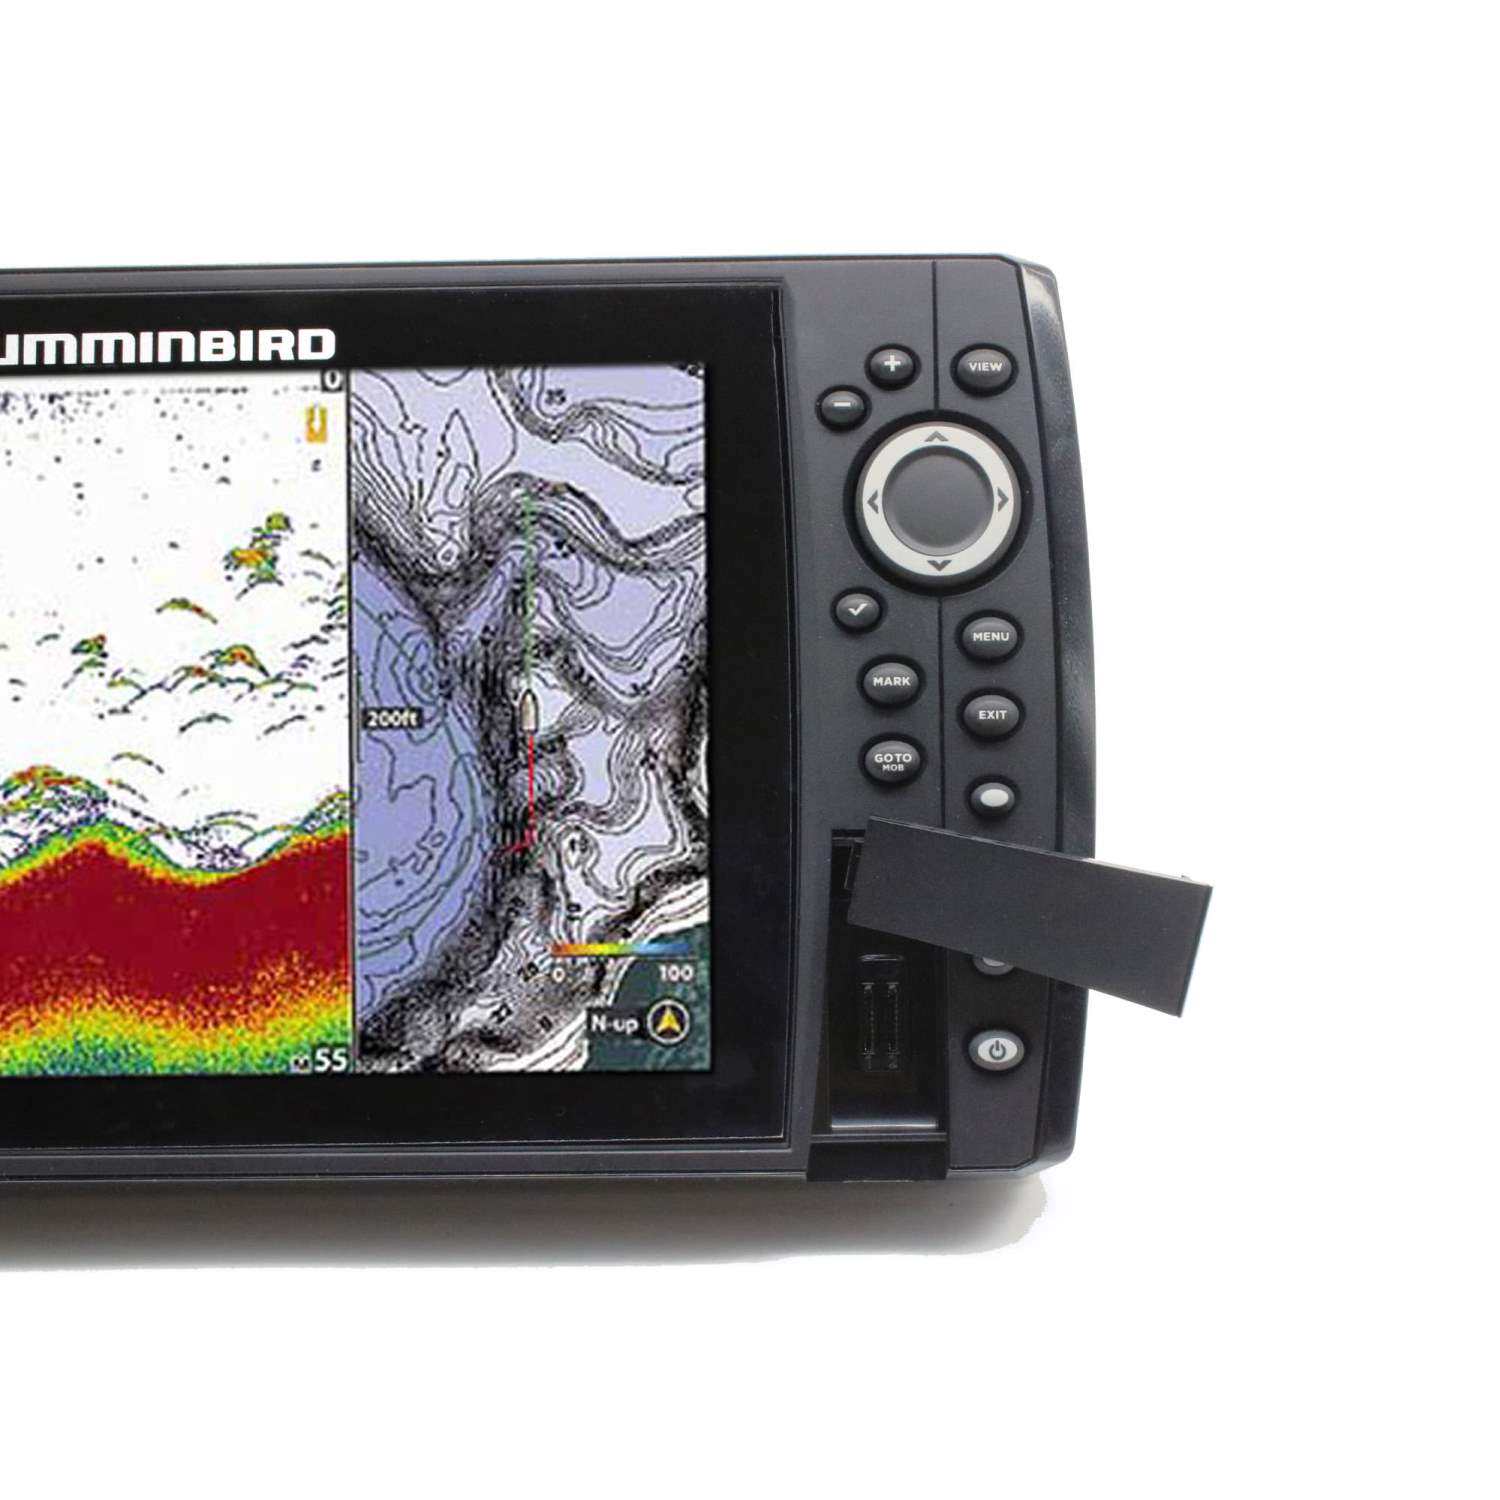 Need Humminbird Gear for Less. Try This Electronics Outlet